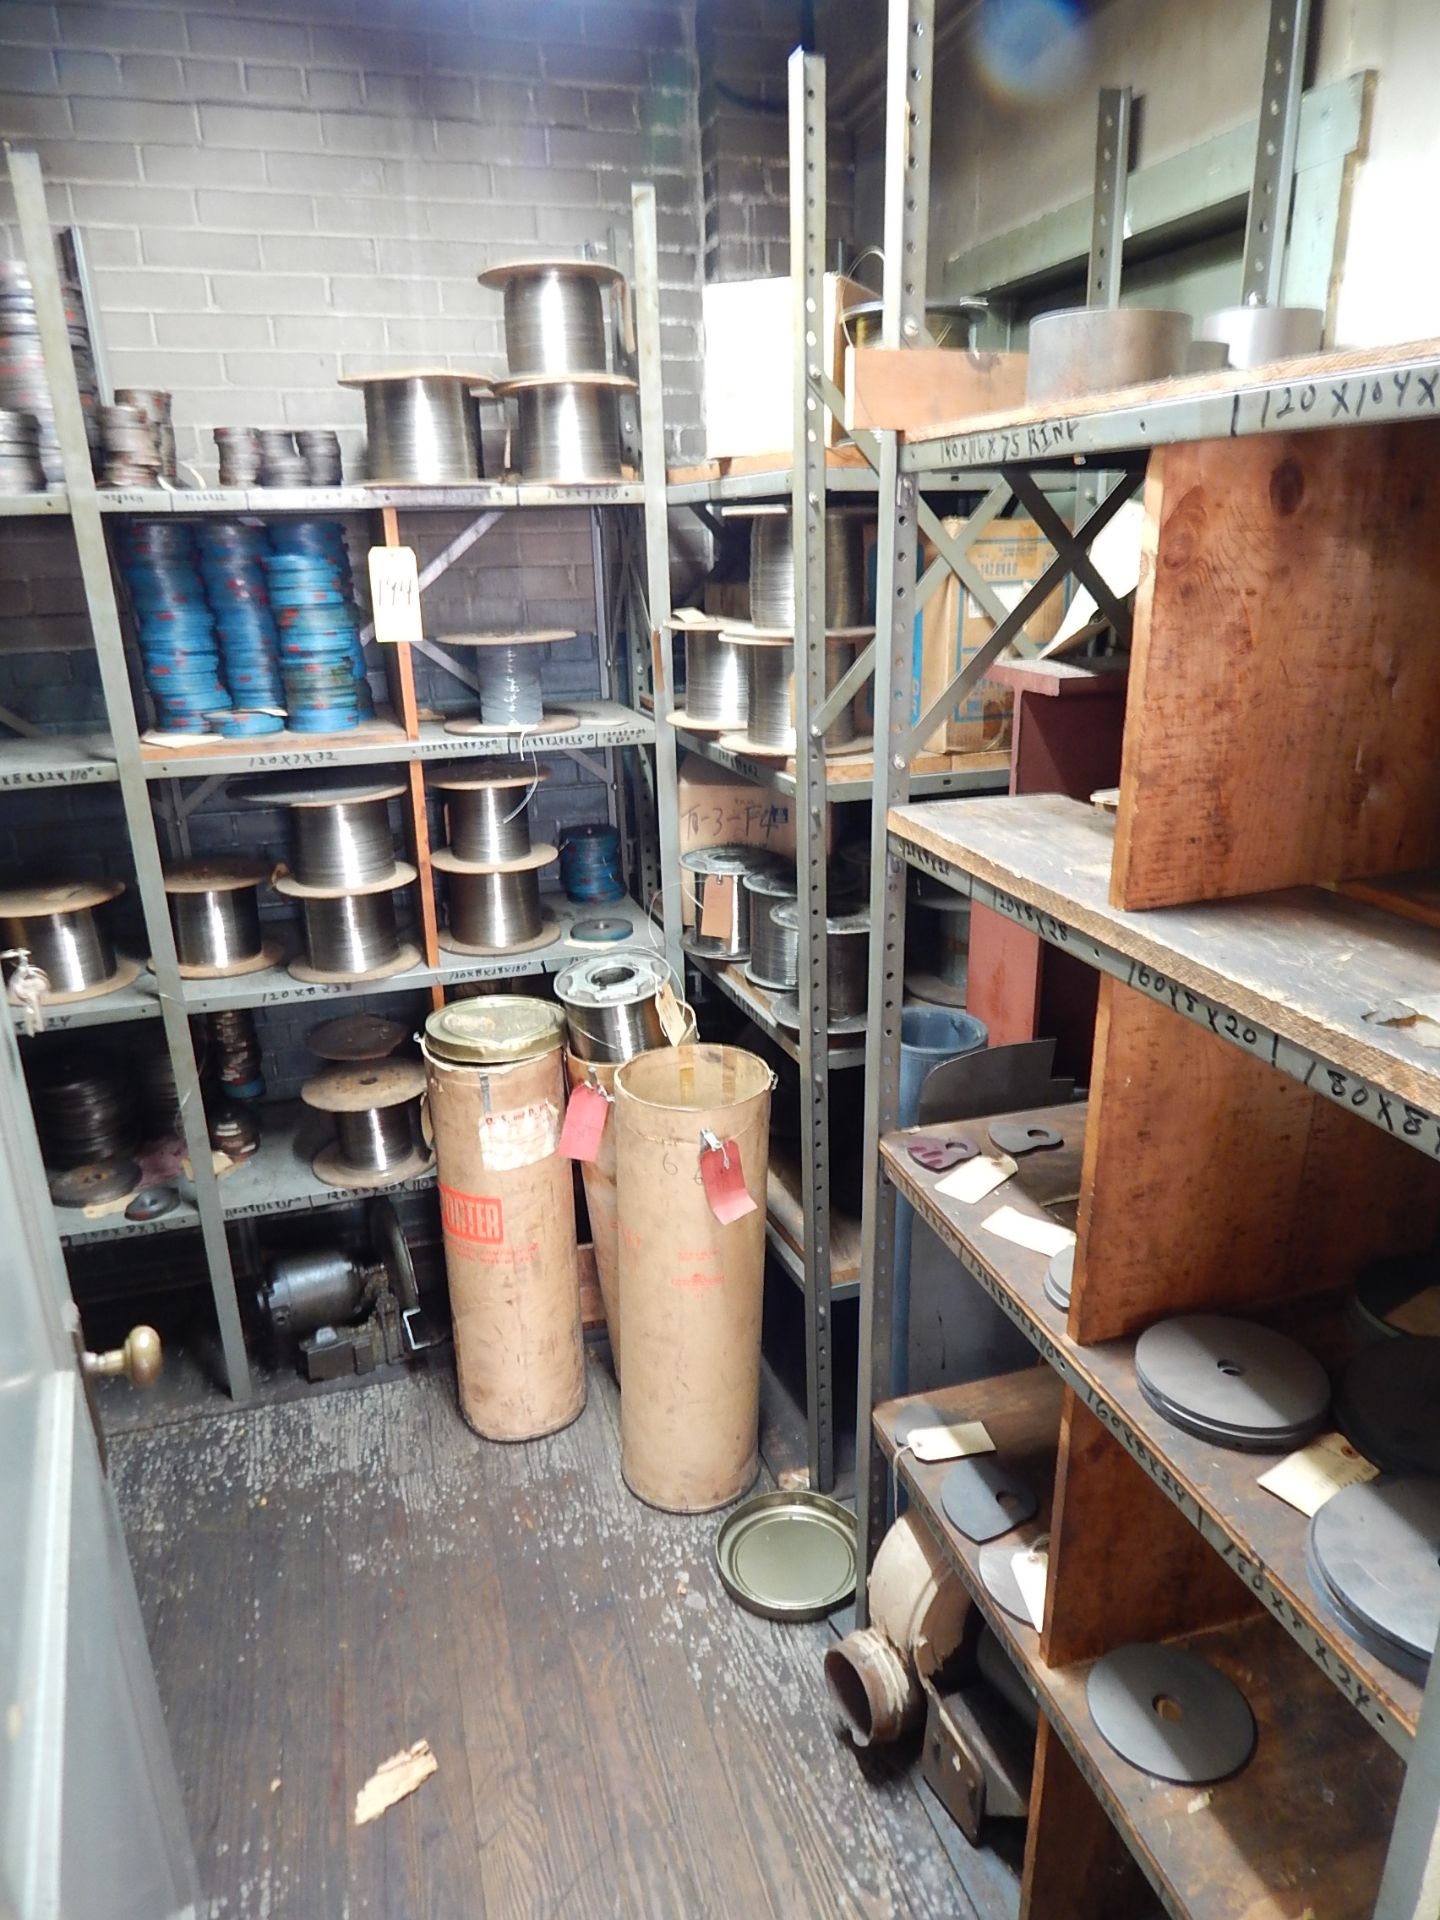 Contents of Storage Room; Wire Spools, Machine Cams, Metal Shelving, Banding Material, and